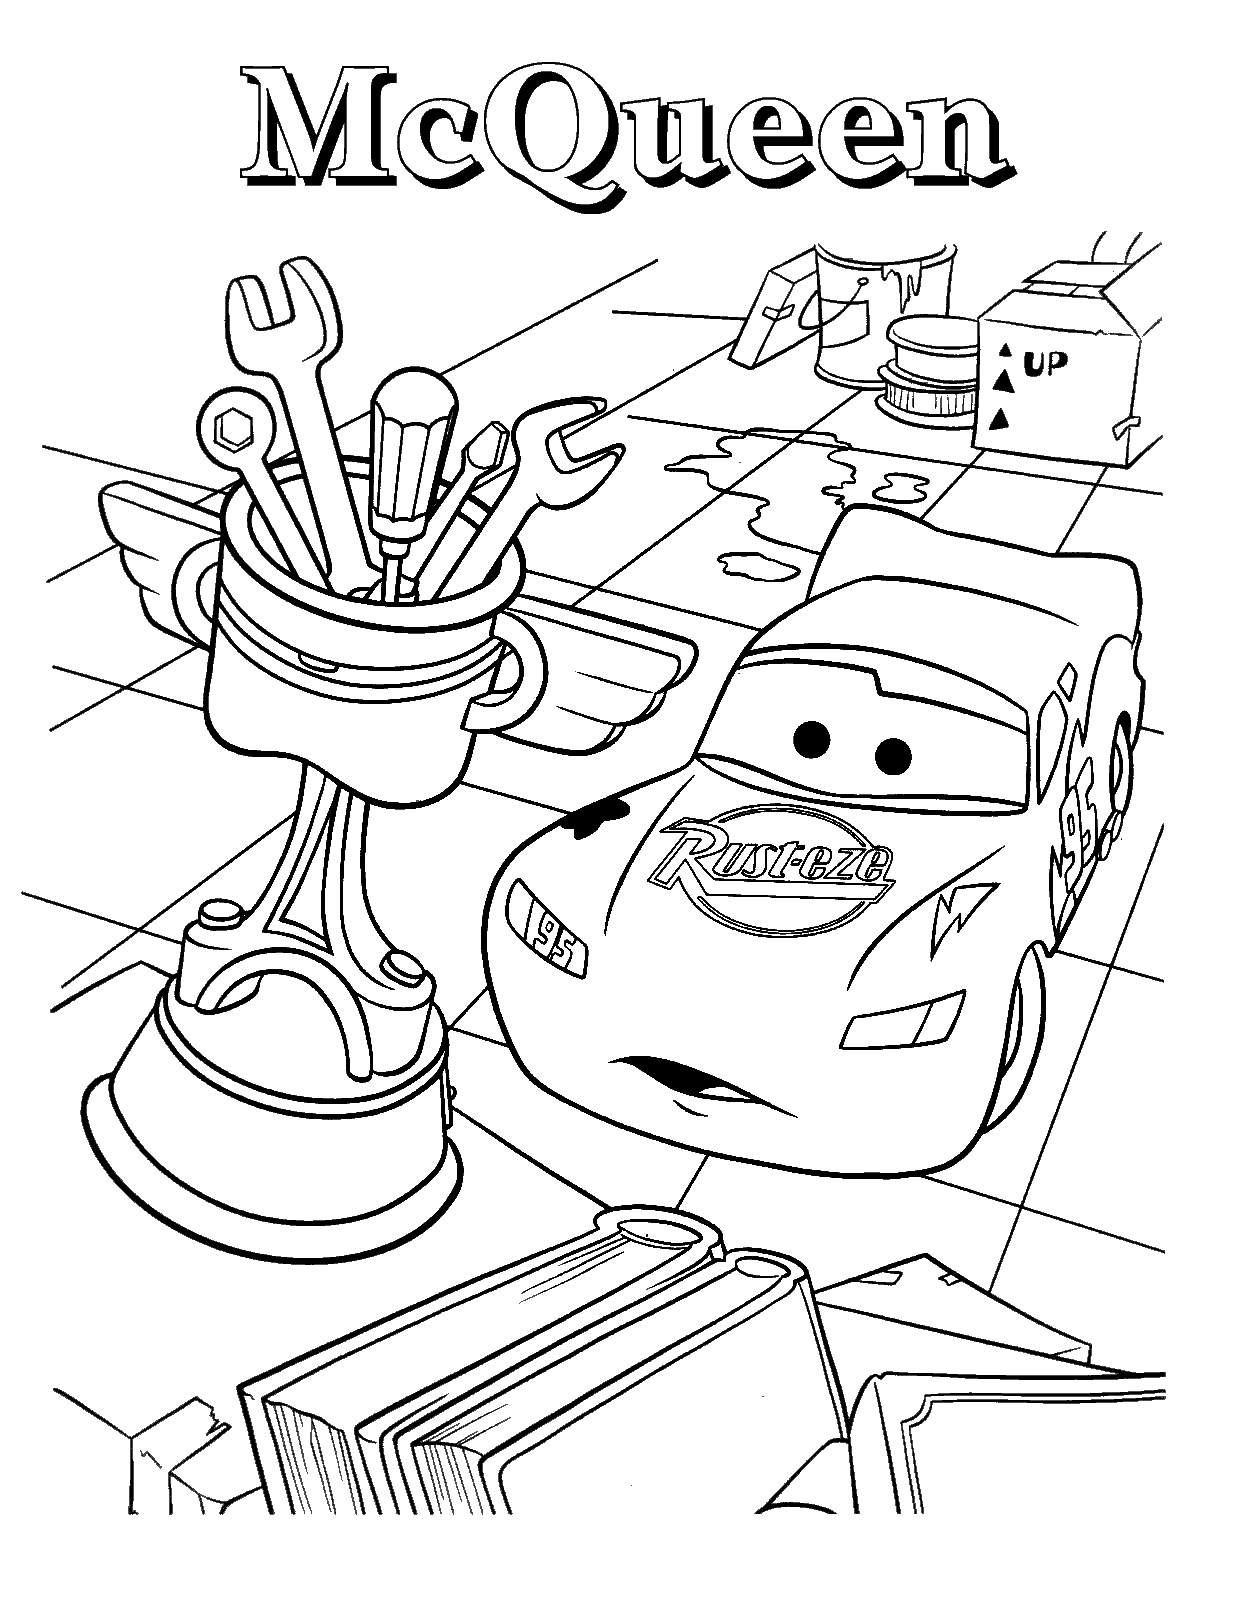 mcqueen coloring pages free printable lightning mcqueen coloring pages for kids coloring pages mcqueen 